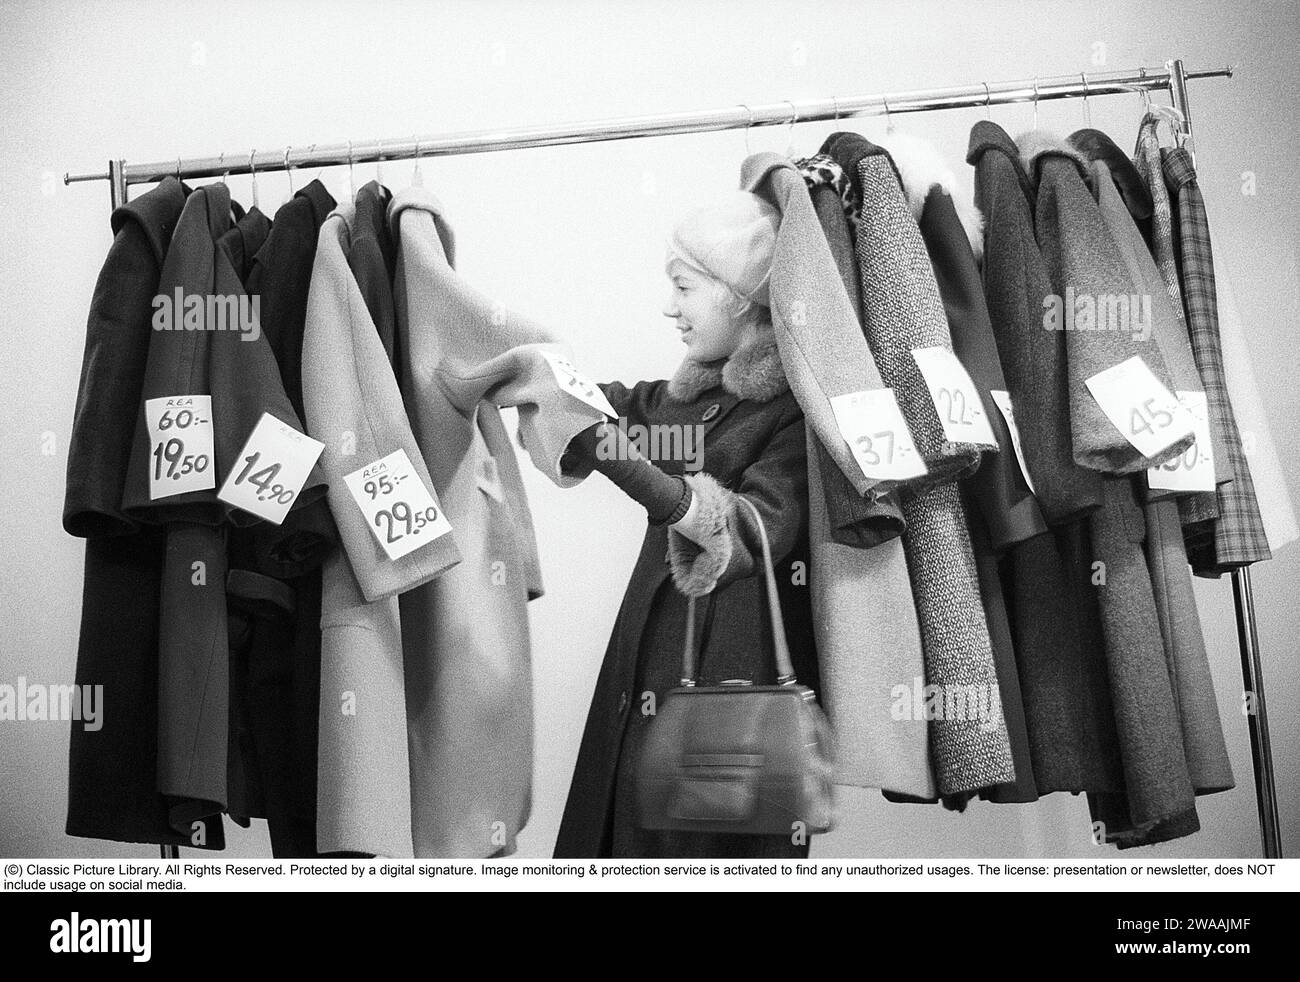 Great discounts of outerwear in the 1960s. A woman stands by a clothes rack, choosing from outerwear and coats marked with price tags with discounted prices. Judging by her face, she appreciates the reduced prices and thinks she's getting real bargains. Sweden January 1963. Ref CV28 Stock Photo